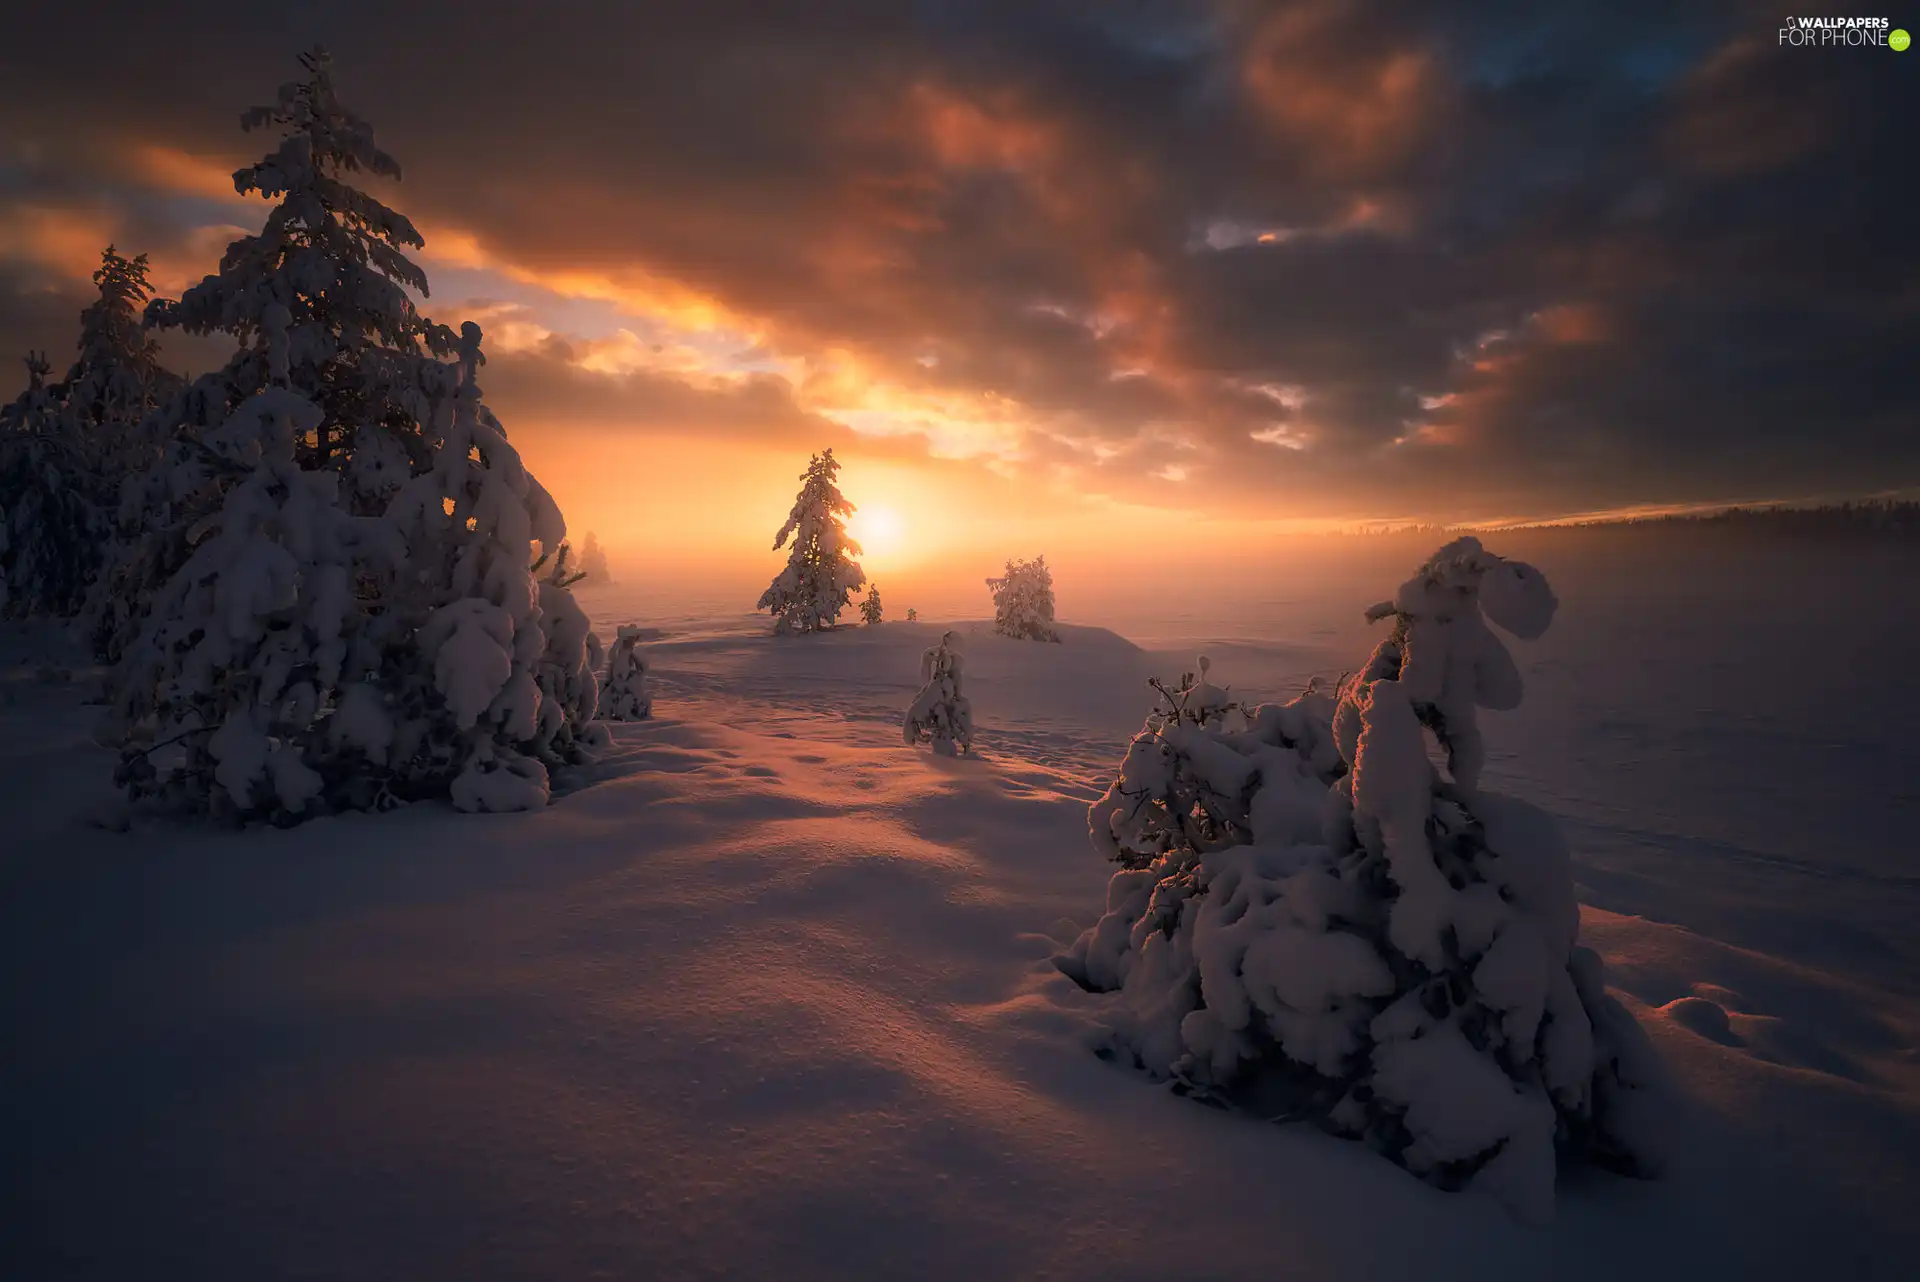 Snowy, winter, viewes, Spruces, trees, Great Sunsets